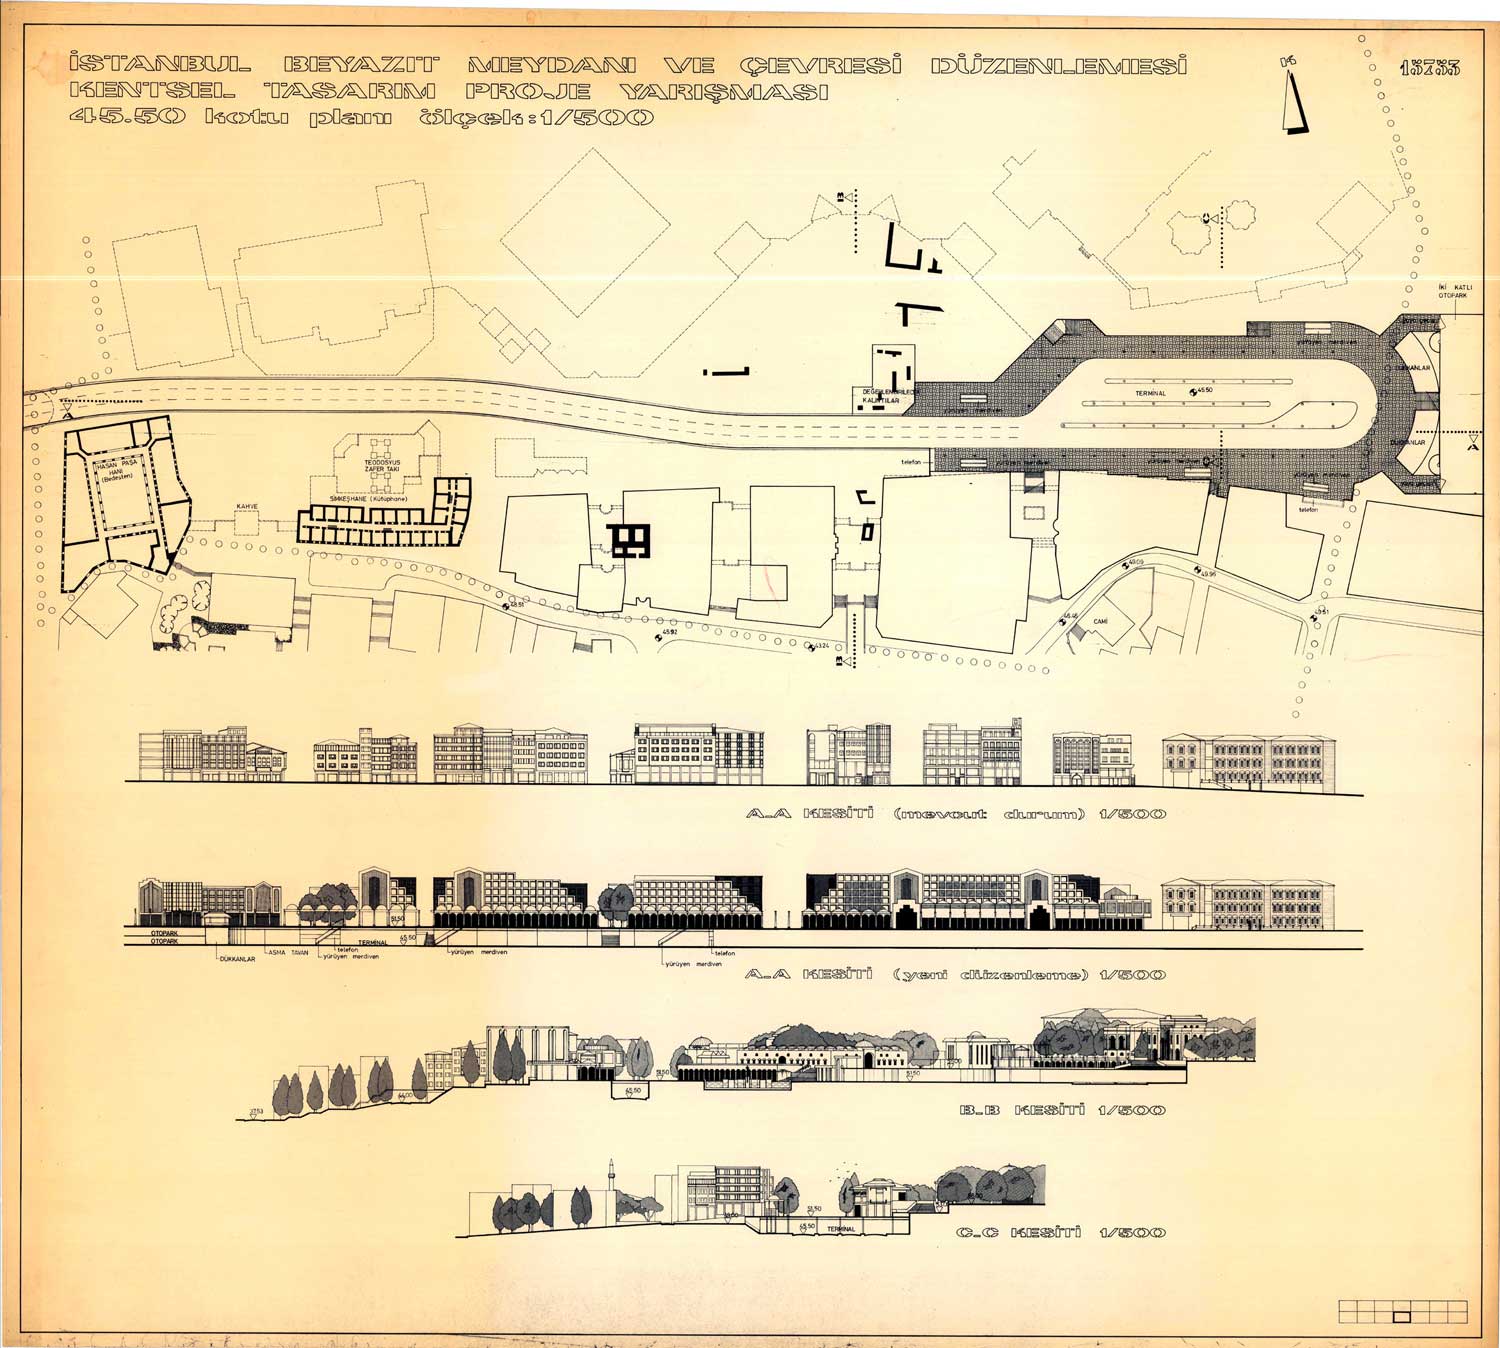 Beyazit Square, Urban Design Competition 1987. Ground plans and cross-sectionals, by Fatma Vedia Dökmeci and Yaprak Karlıdağ.